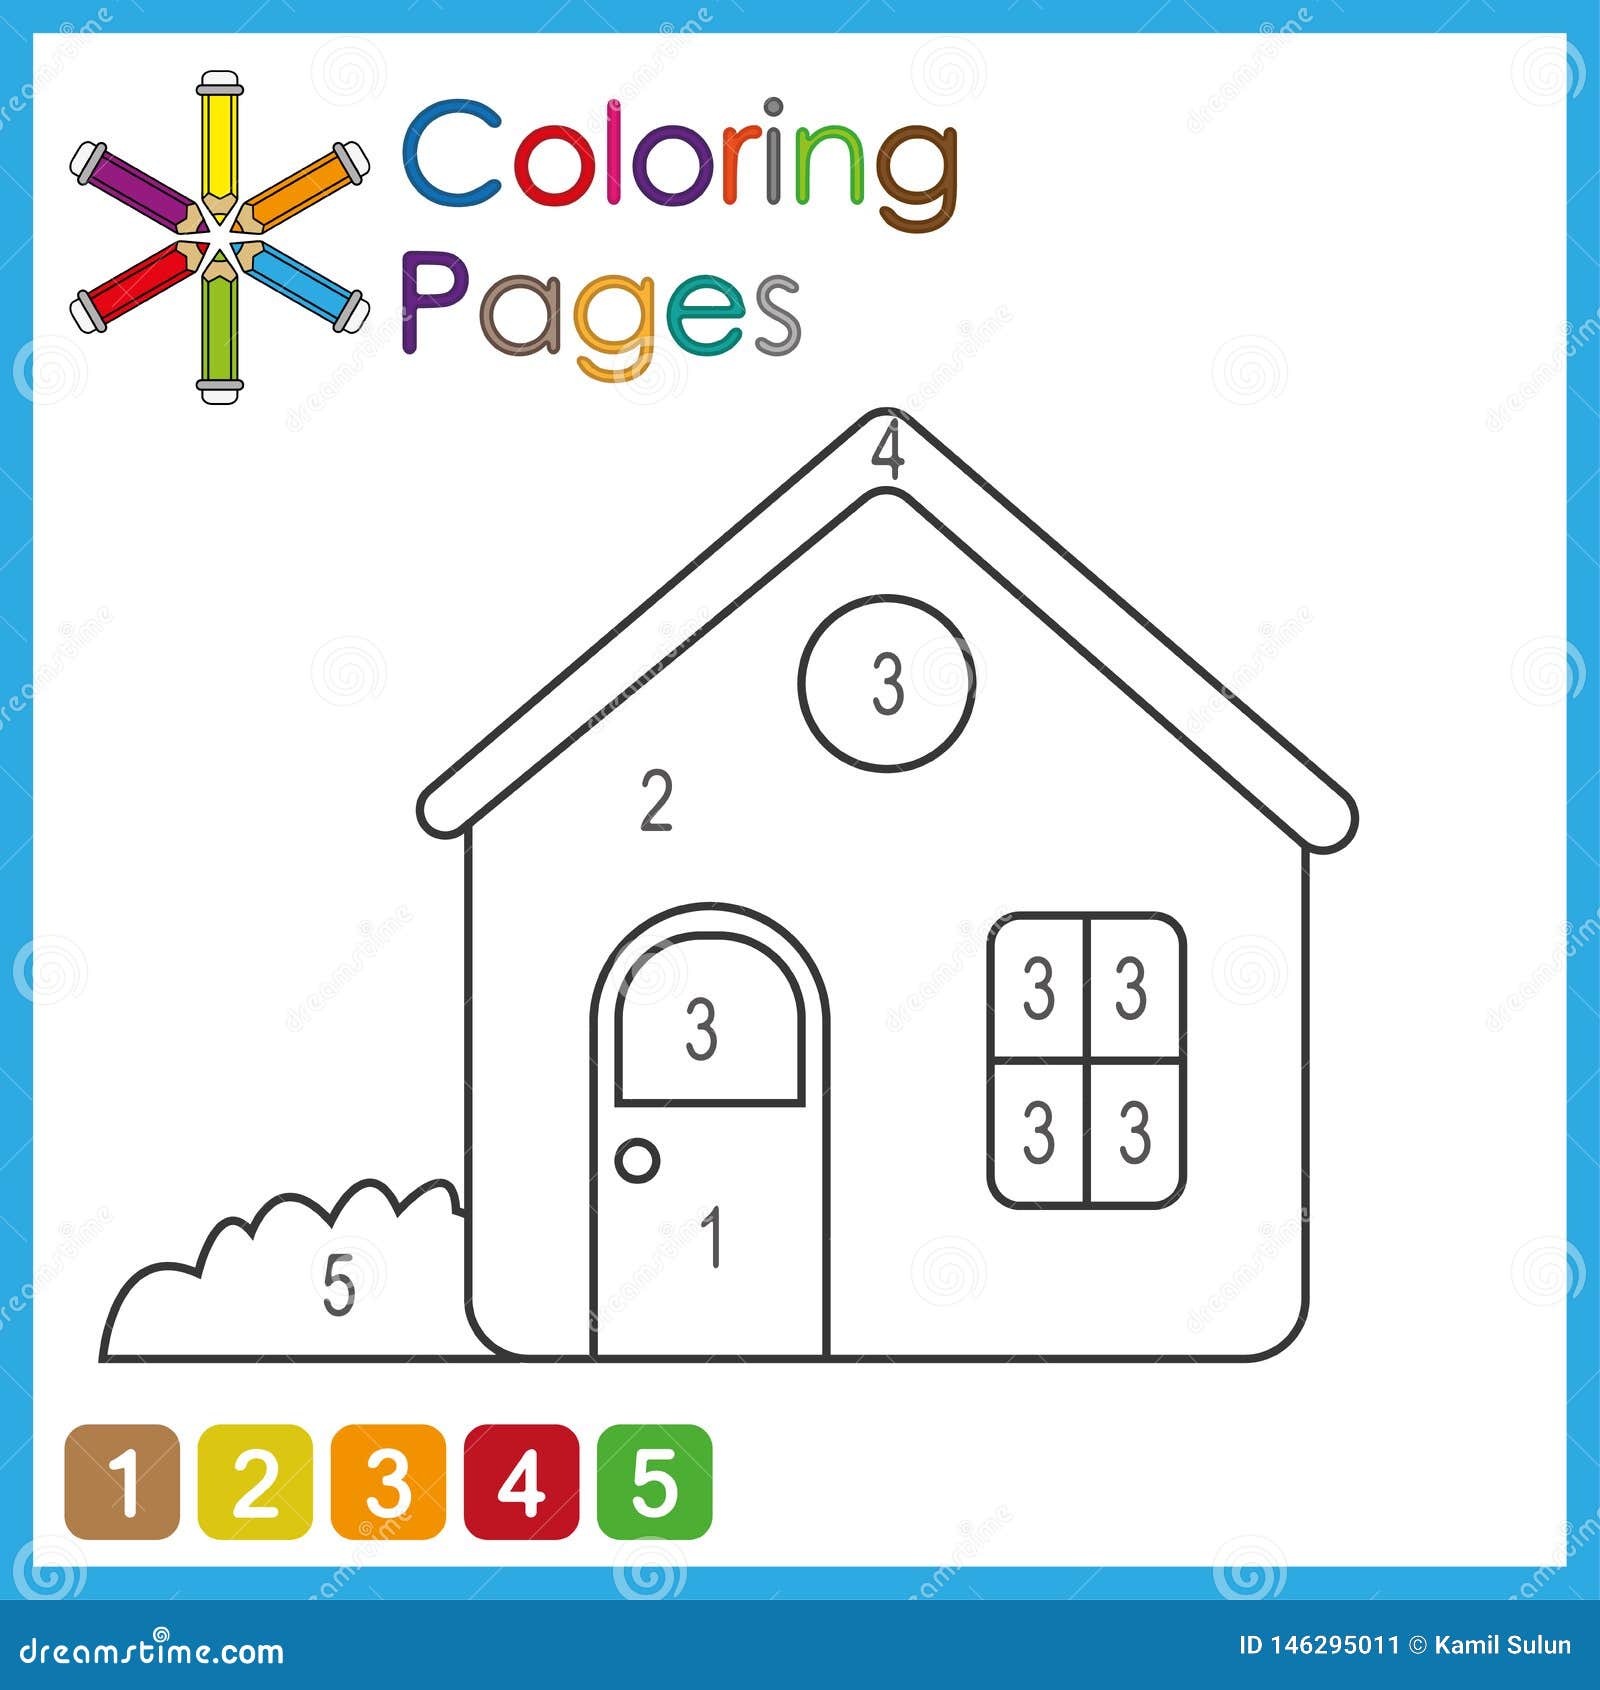 https://thumbs.dreamstime.com/z/coloring-page-kids-color-parts-object-according-to-numbers-activity-pages-146295011.jpg